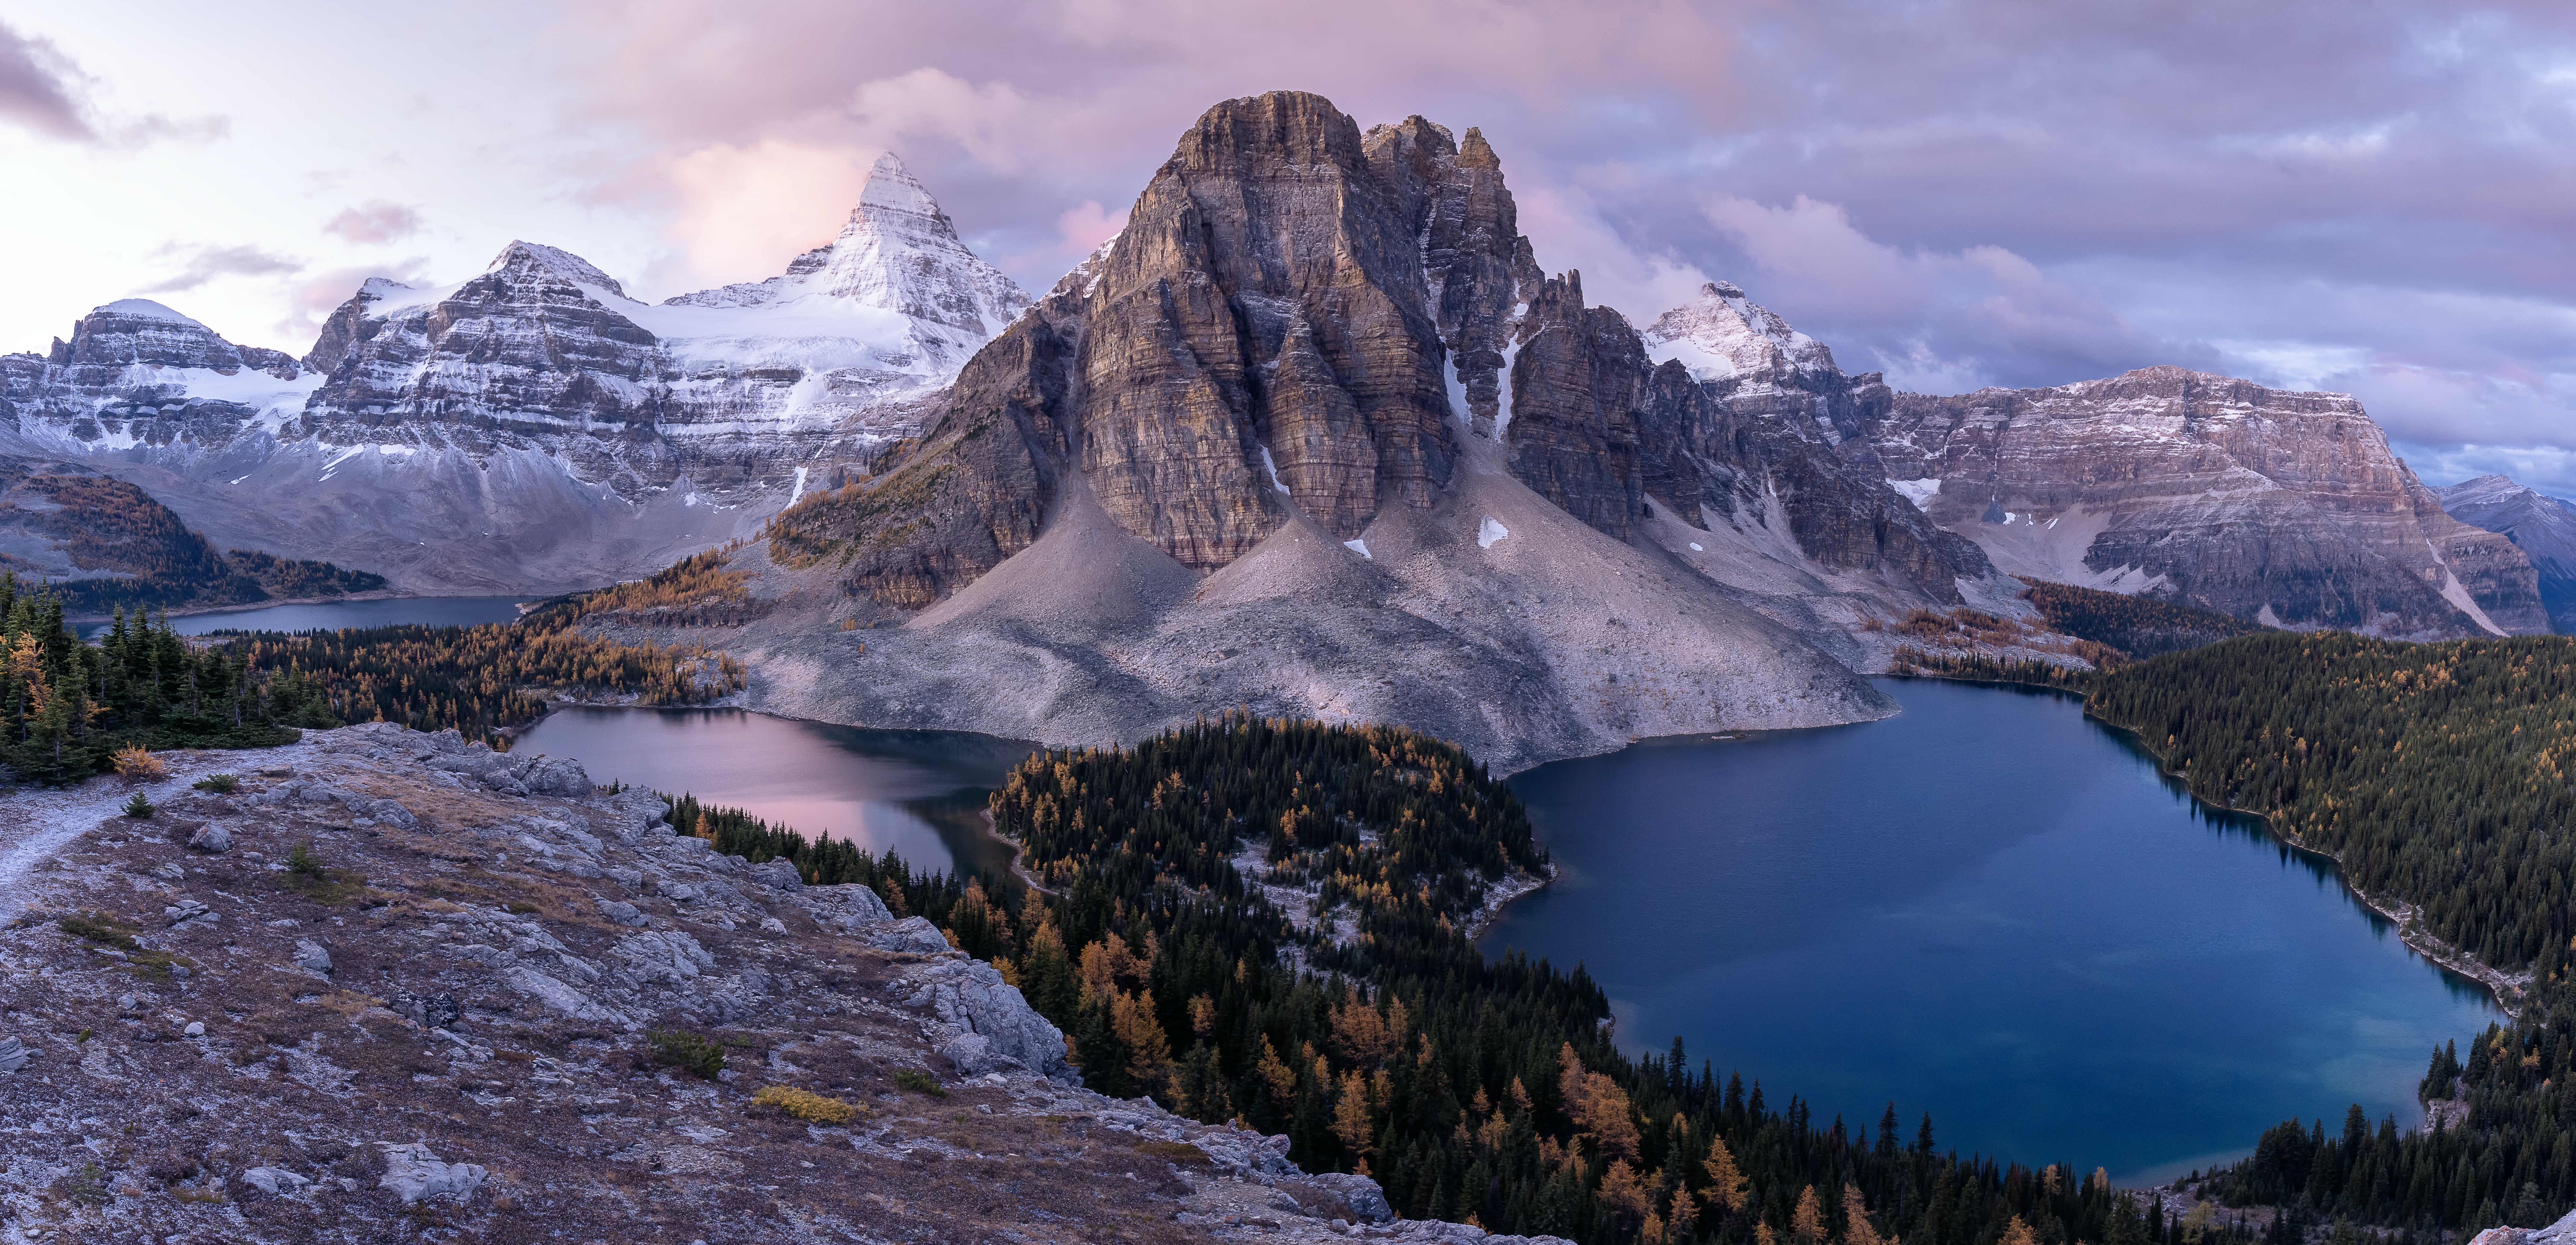 General 7990x3863 landscape nature photography mountains lake river snow trees forest clouds Mount Assiniboine Canada